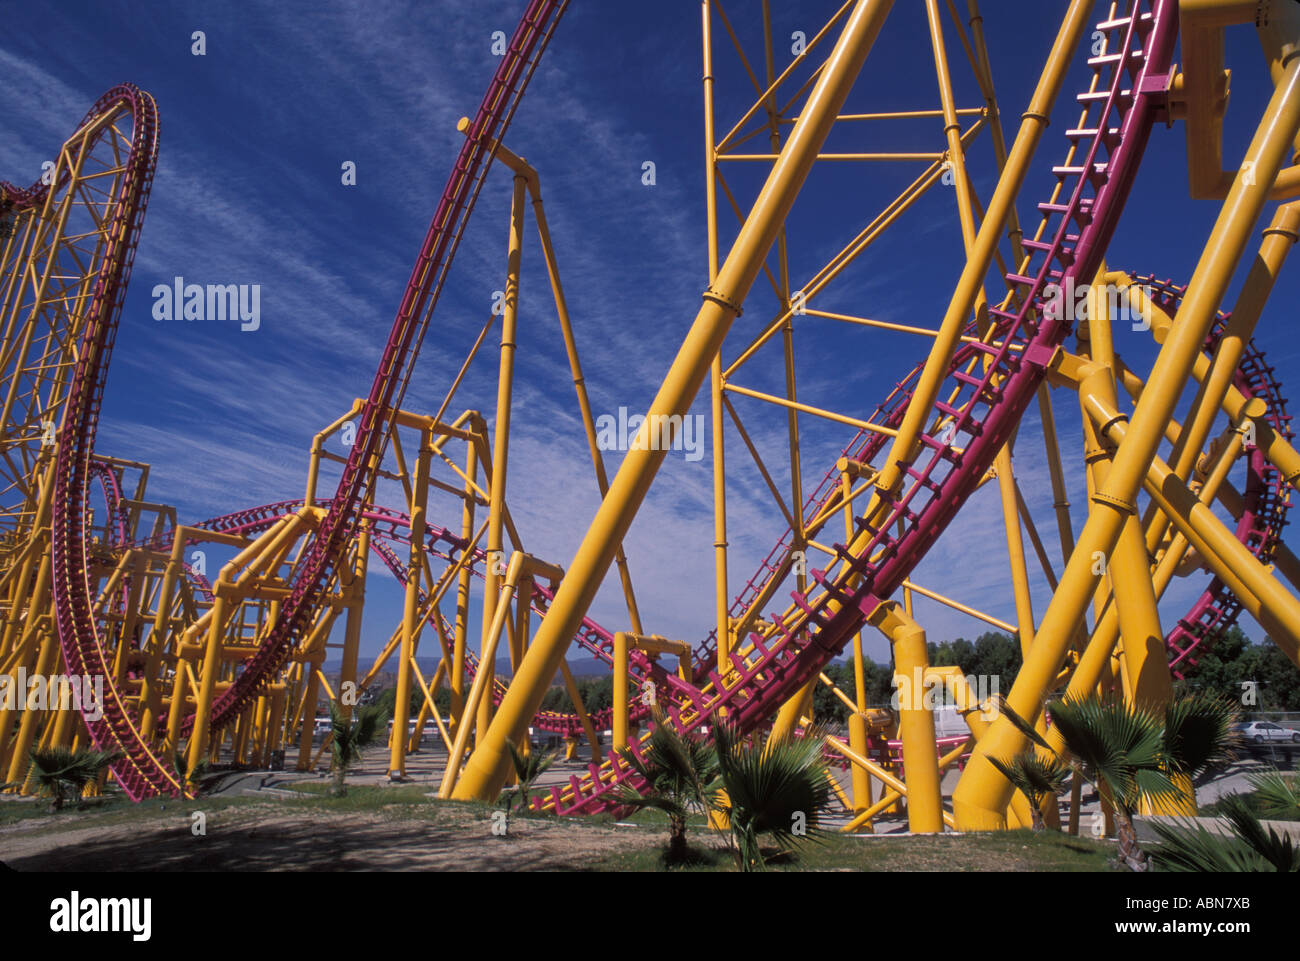 Rollercoaster Six Flags Magic Mountain Los Angeles California United States of America Stock Photo